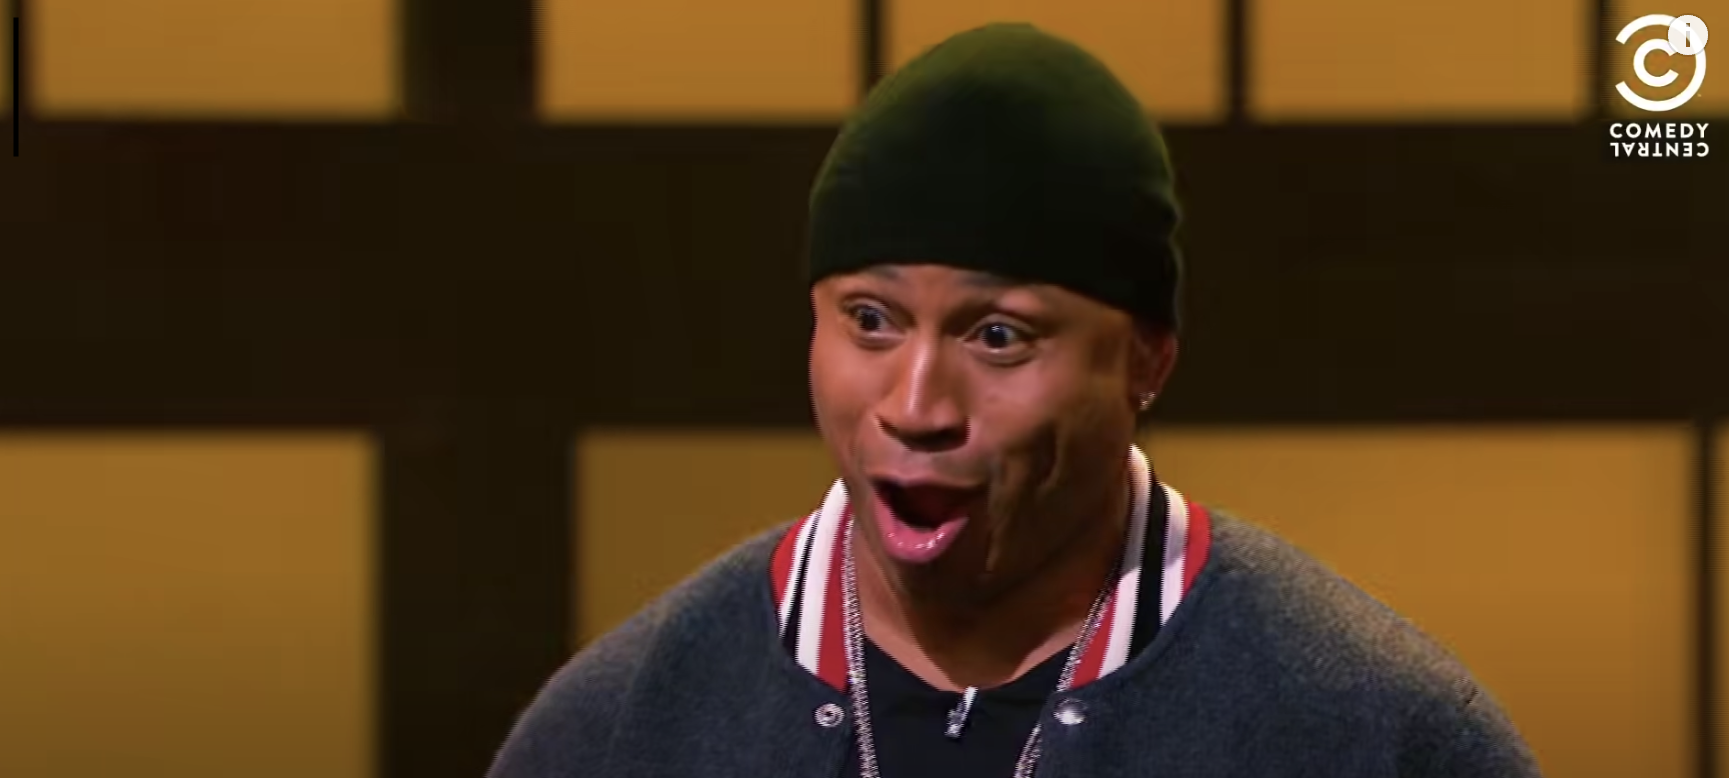 LL Cool J with his mouth wide open in awe and shock